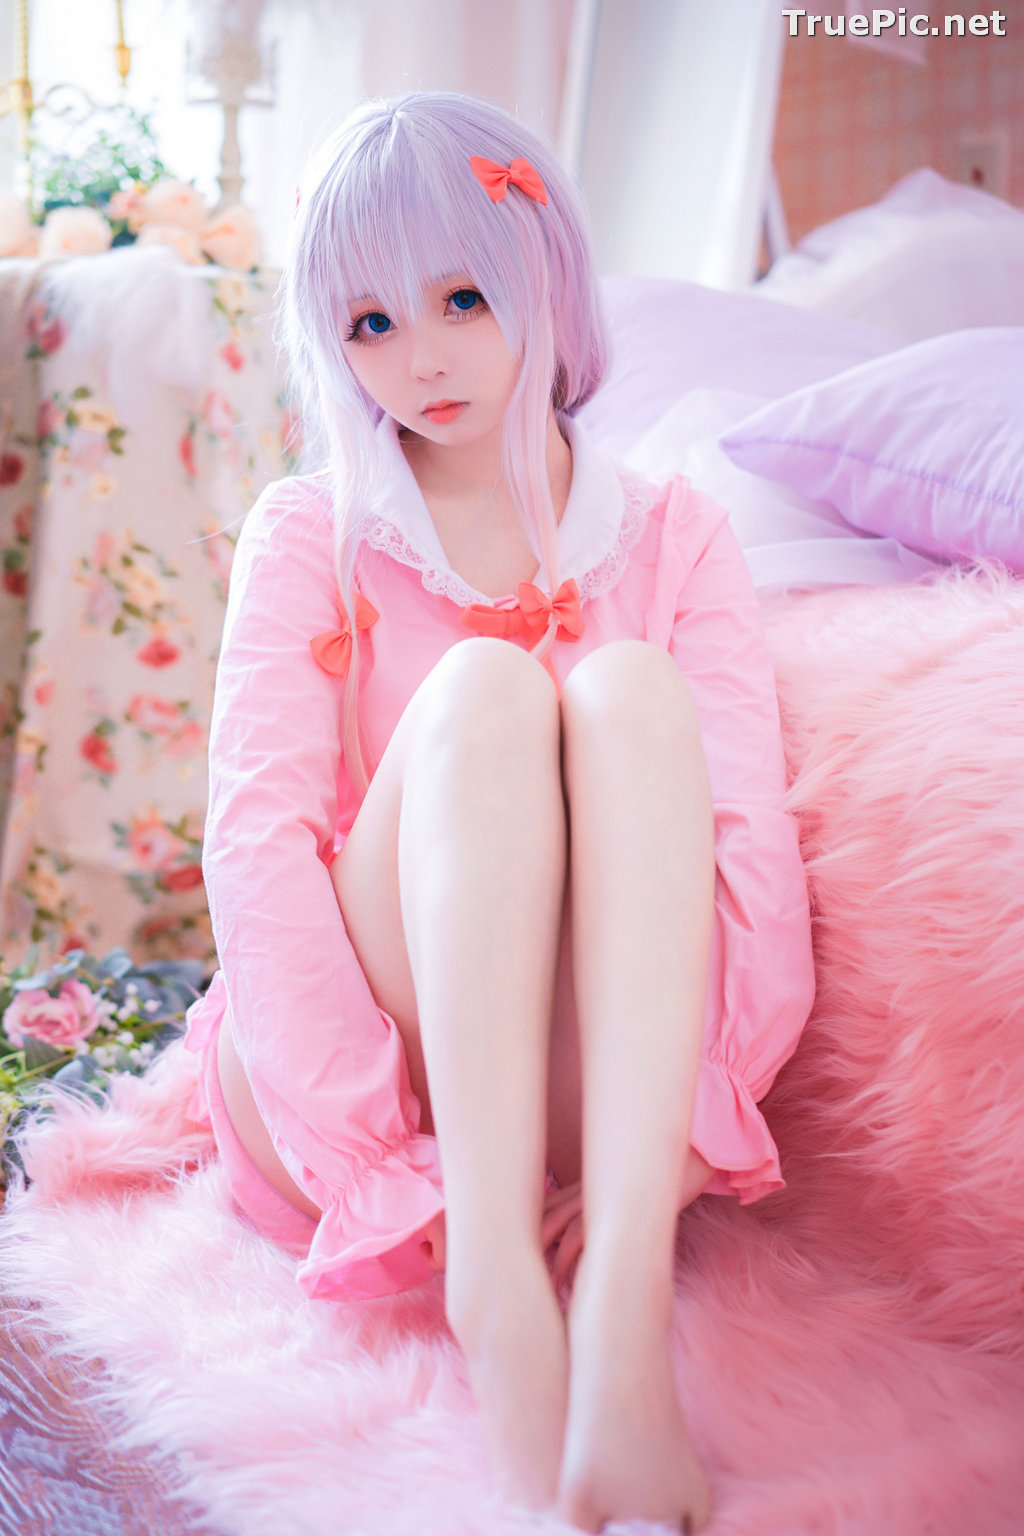 Image [MTCos] 喵糖映画 Vol.048 - Chinese Cute Model - Lovely Pink - TruePic.net - Picture-18